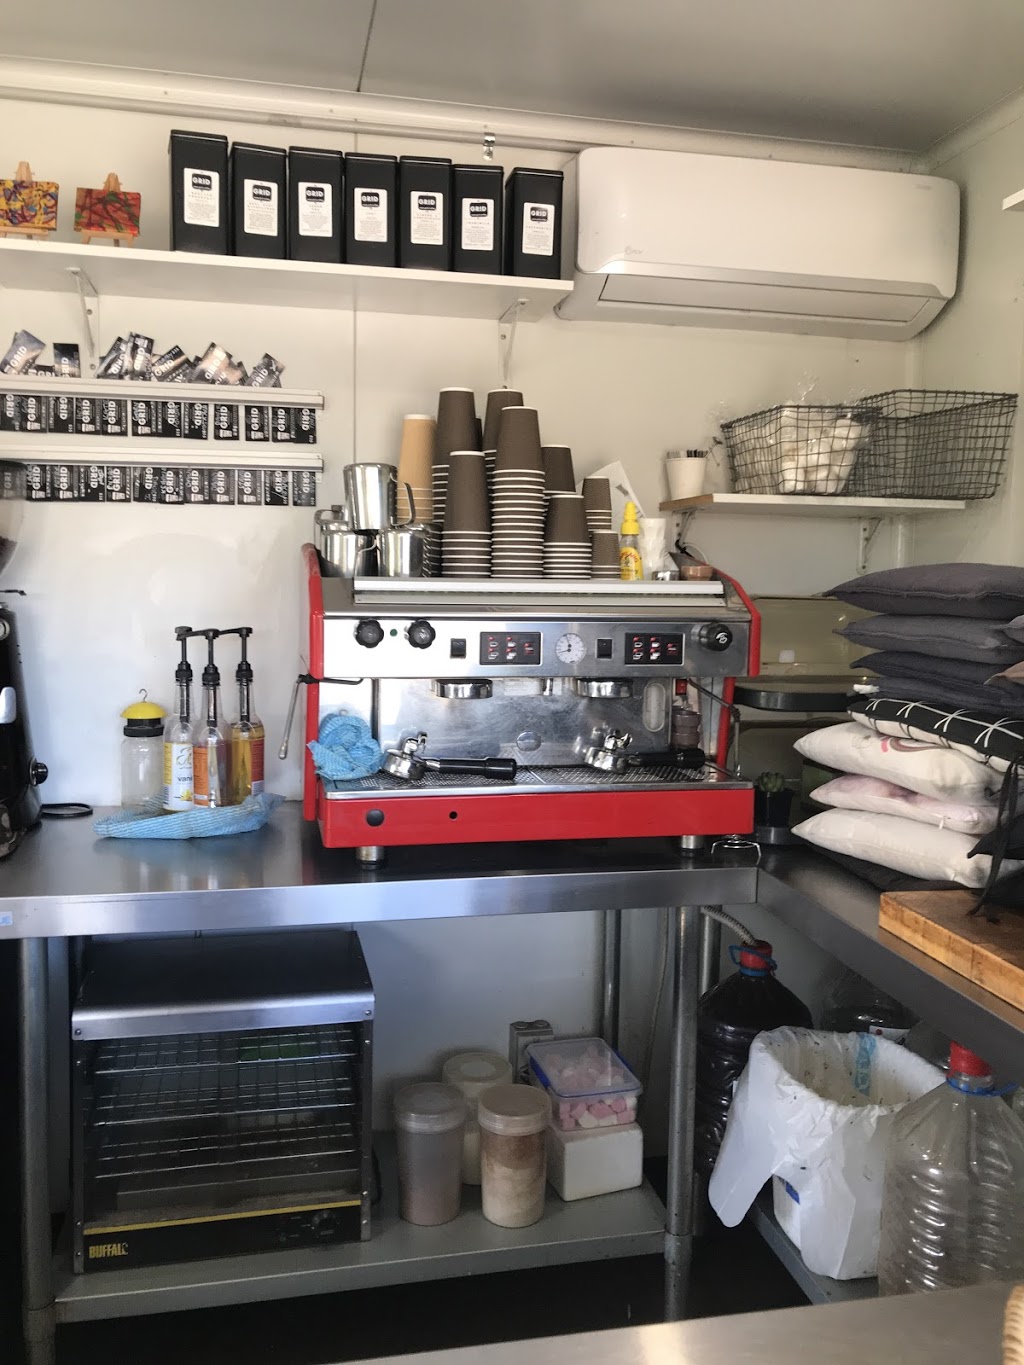 Grid Espresso Wooloowin | cafe | 128-150 Shaw Rd, Wavell Heights QLD 4012, Australia | 0405509160 OR +61 405 509 160